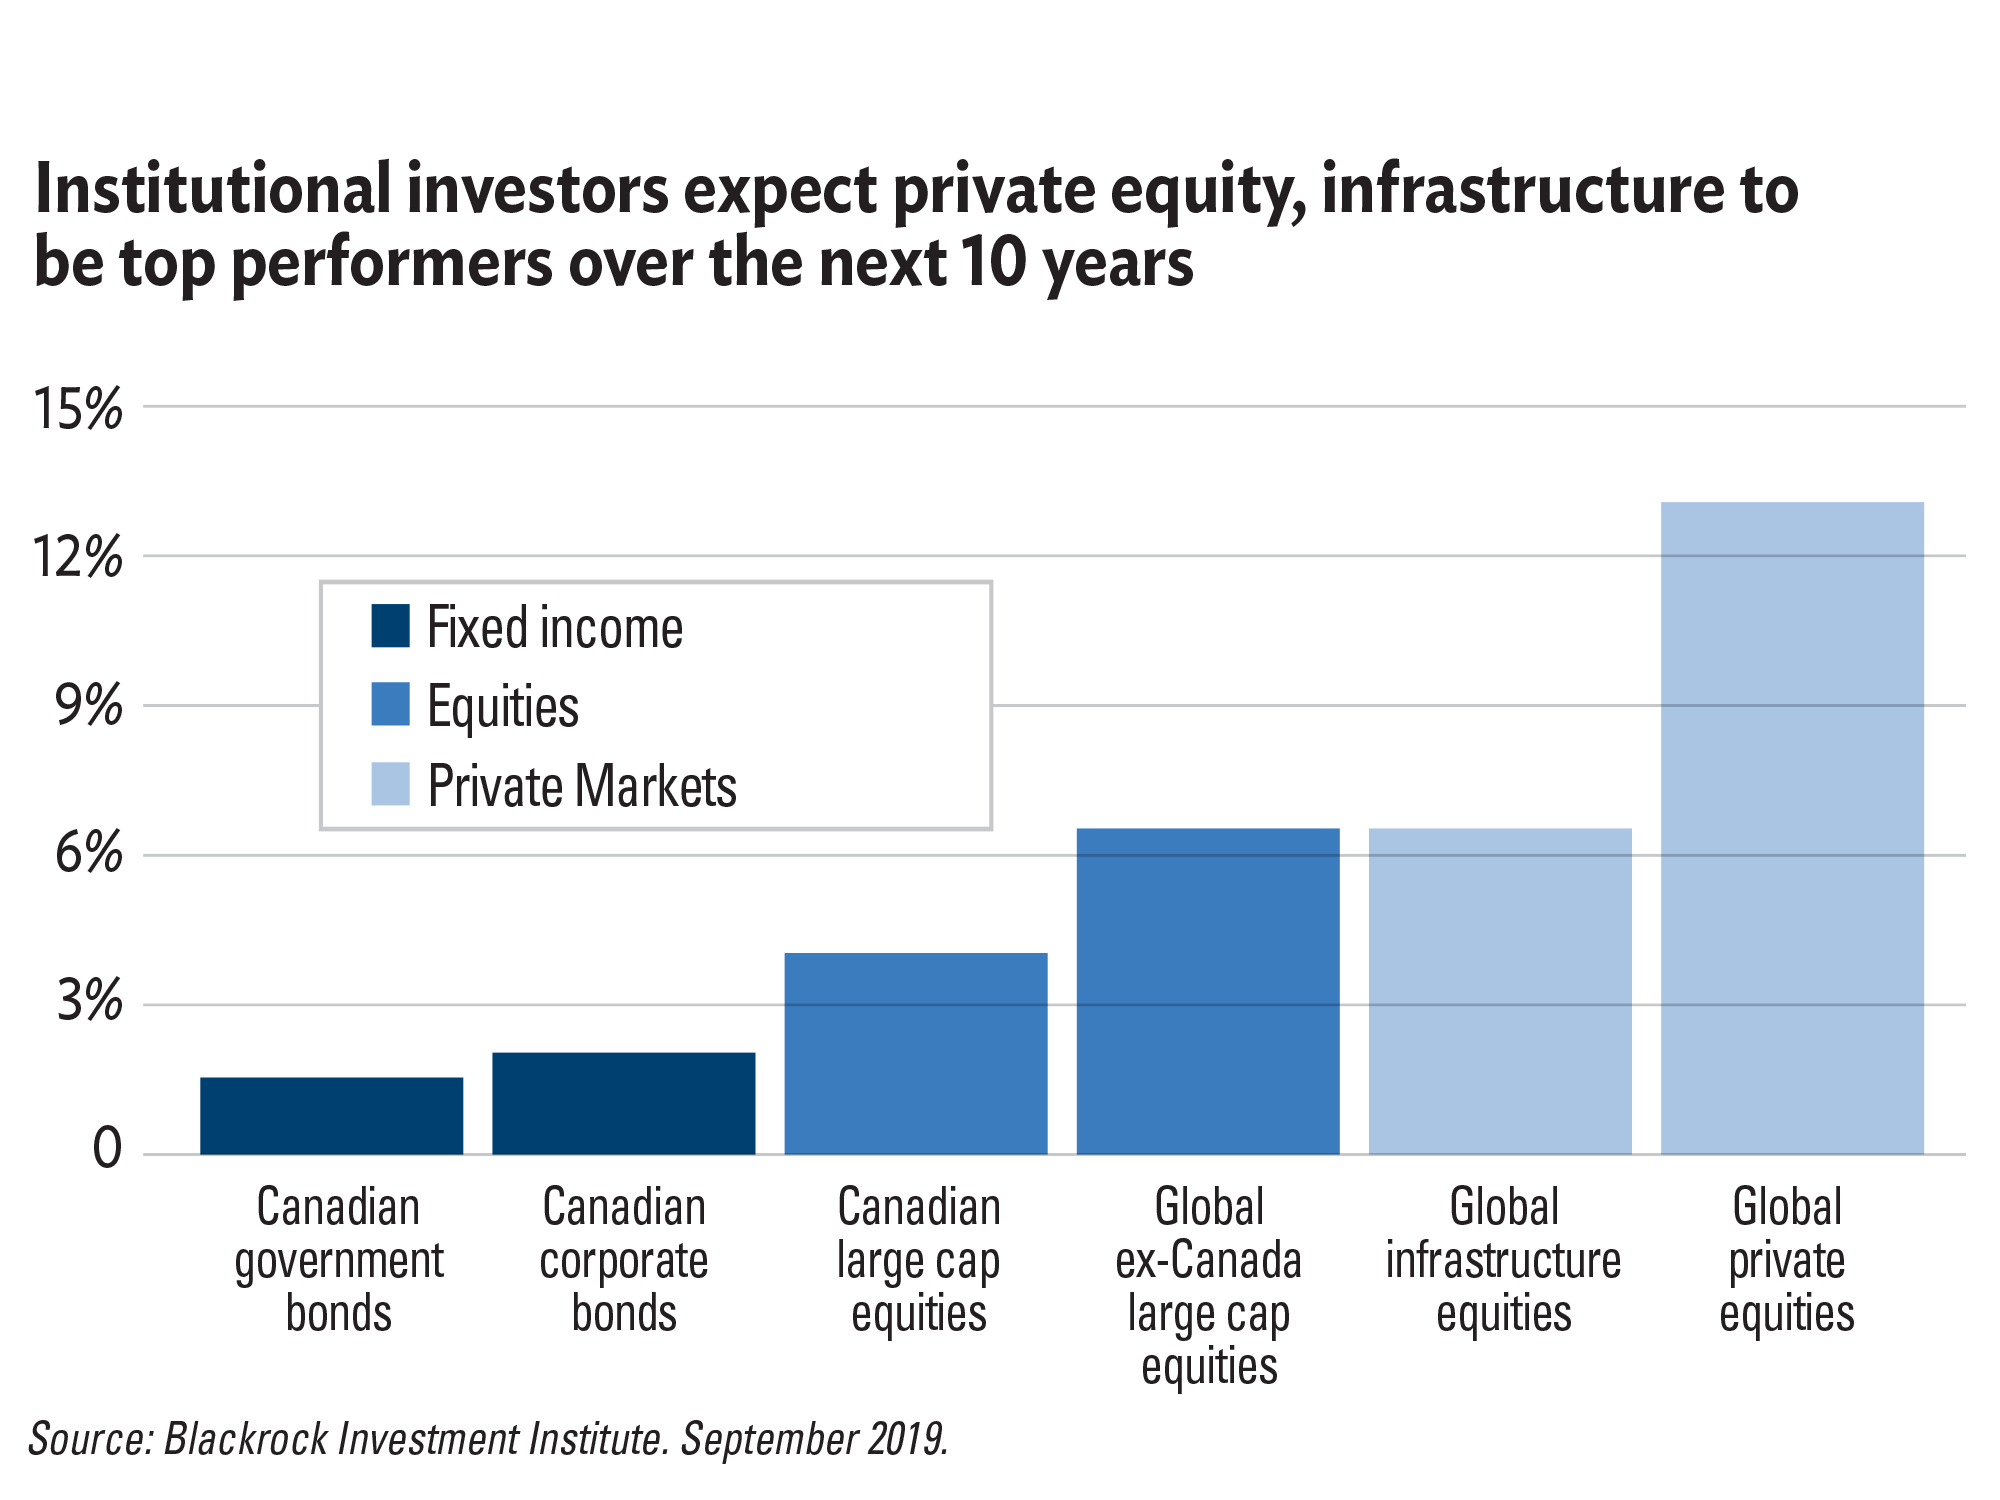 Institutional investors expect private equity, infrastructure to be top performers over the next 10 years